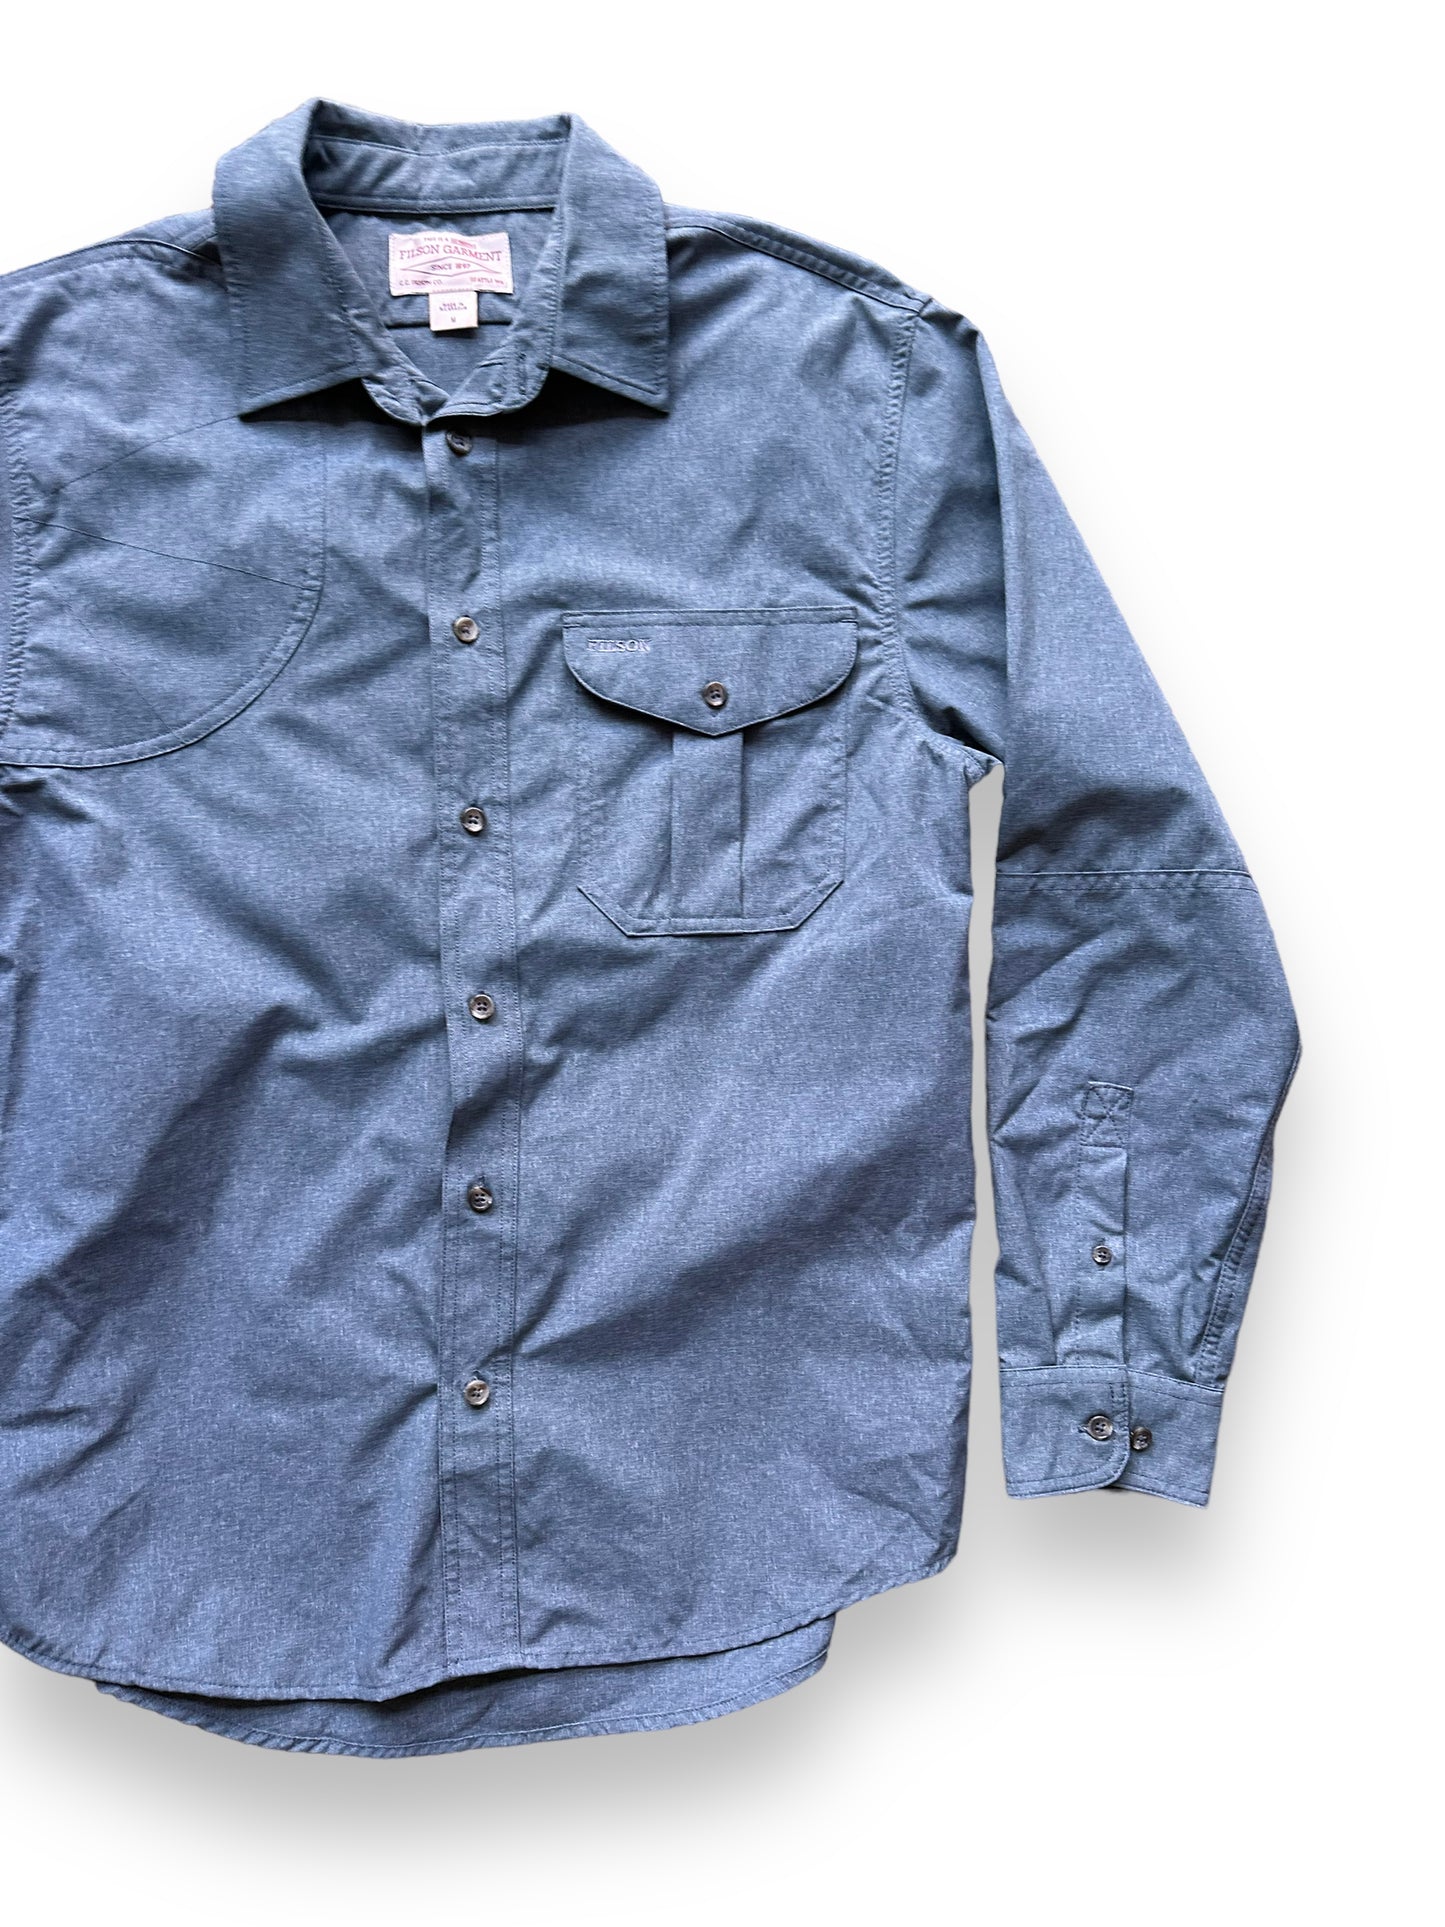 Front Left View of Filson Carbon Blue Right Handed Shooting Shirt SZ M |  Barn Owl Vintage Goods | Vintage Filson Workwear Seattle